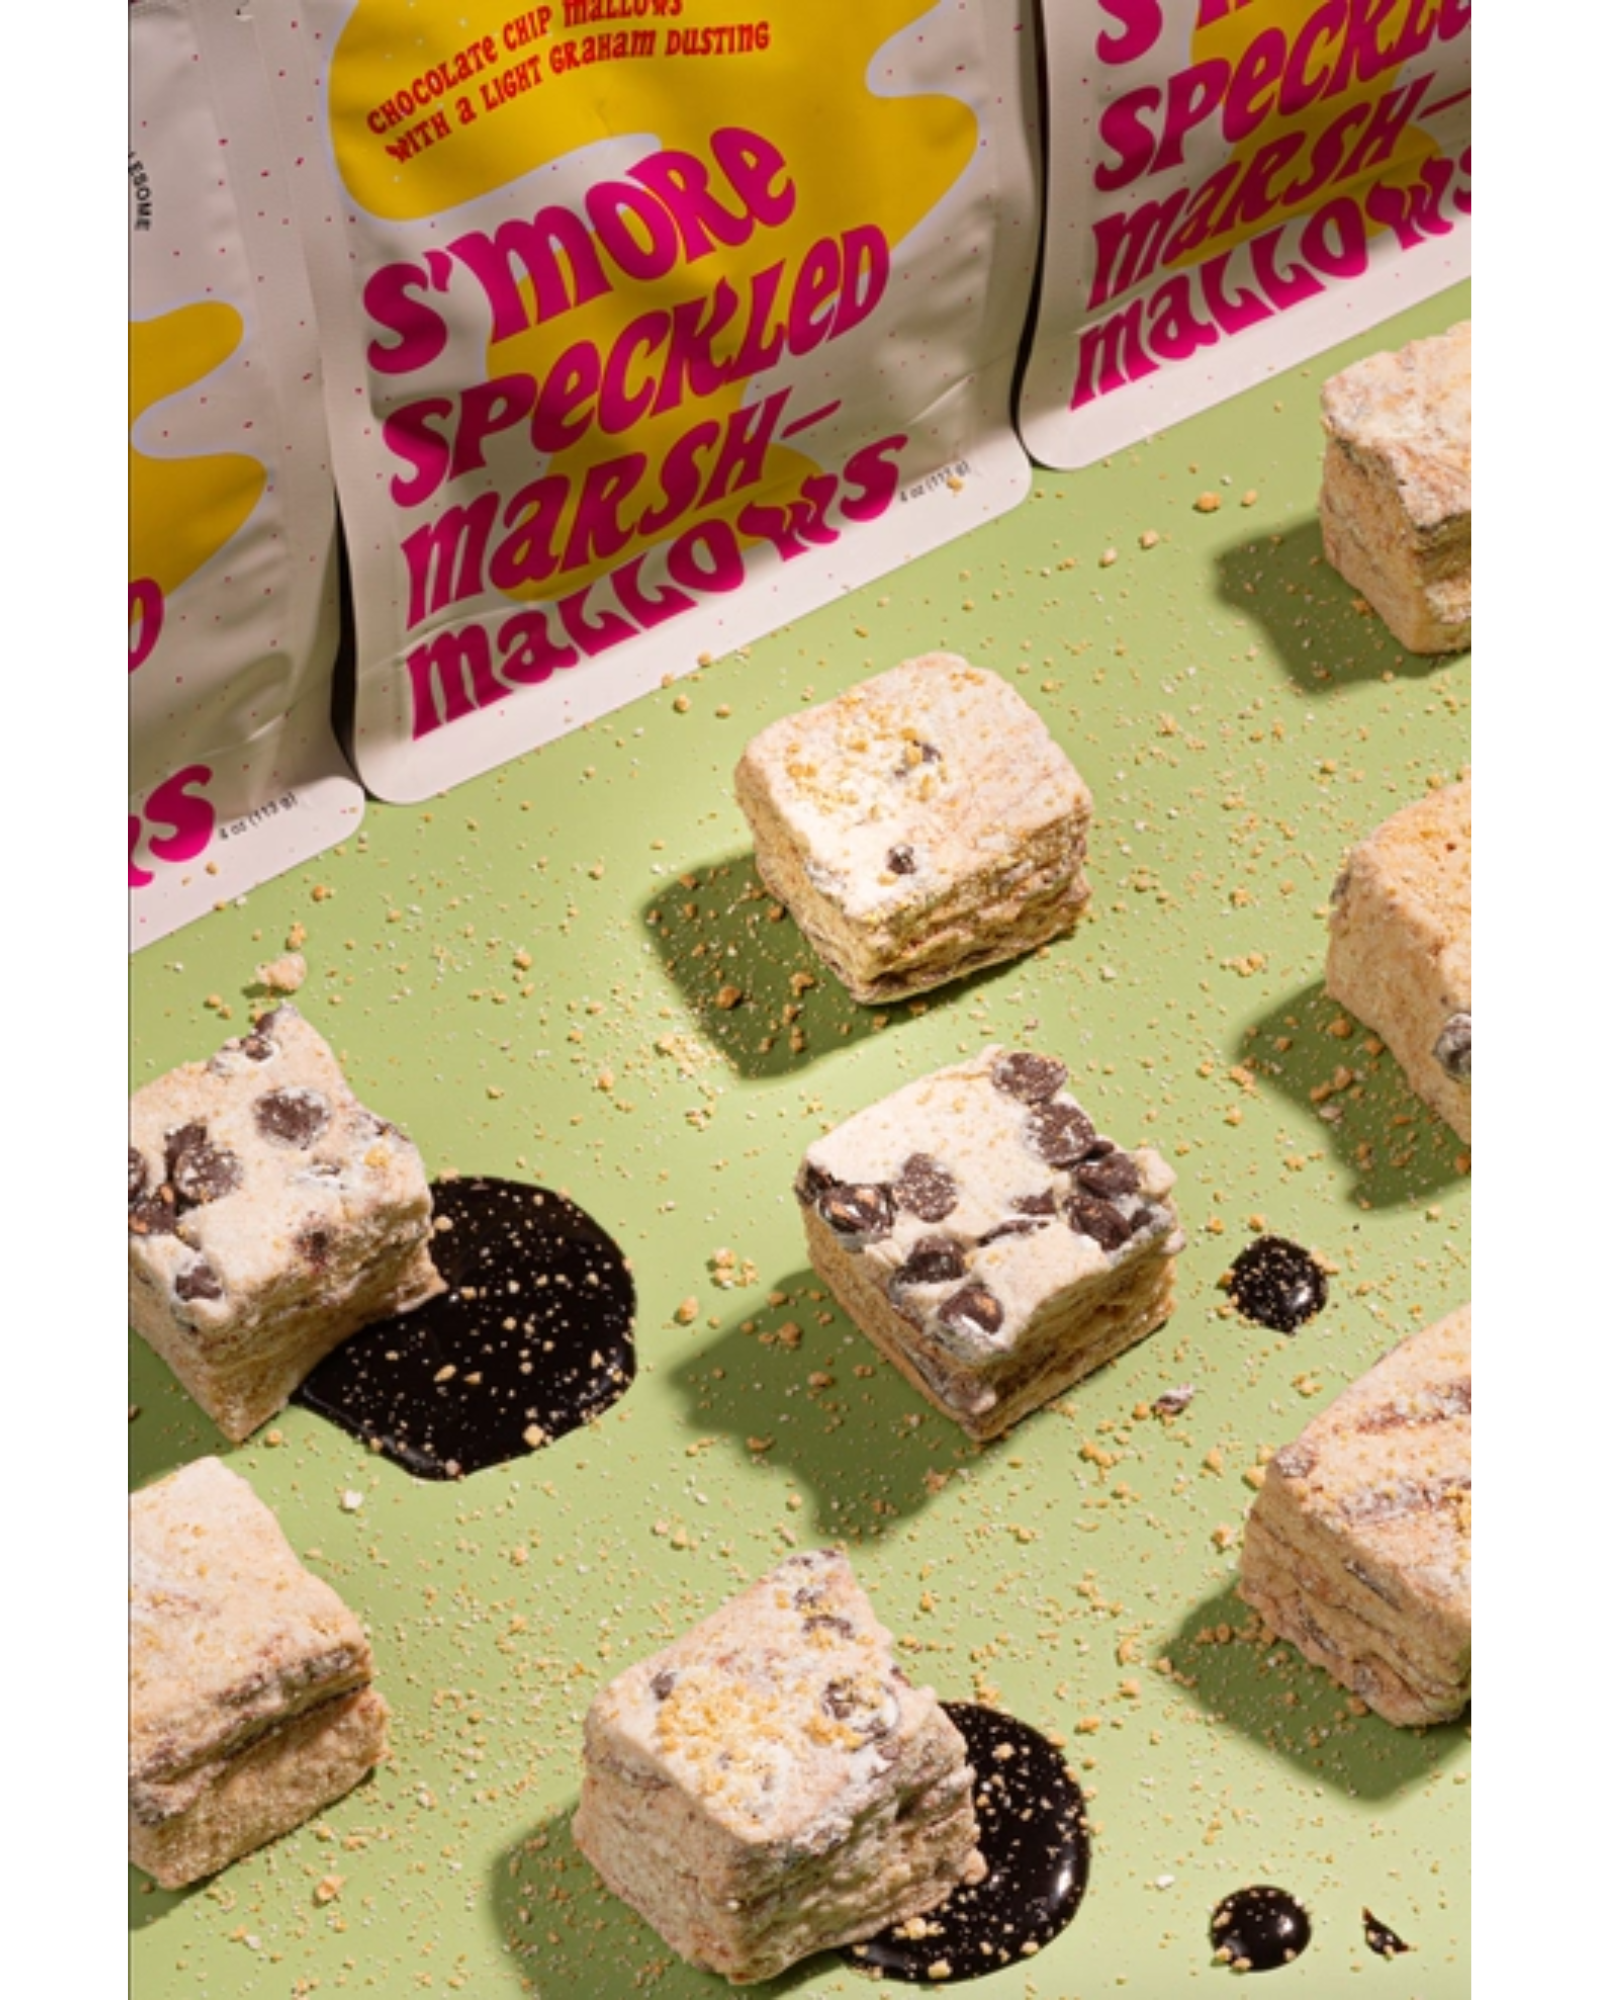 S'more Speckled Marshmallows